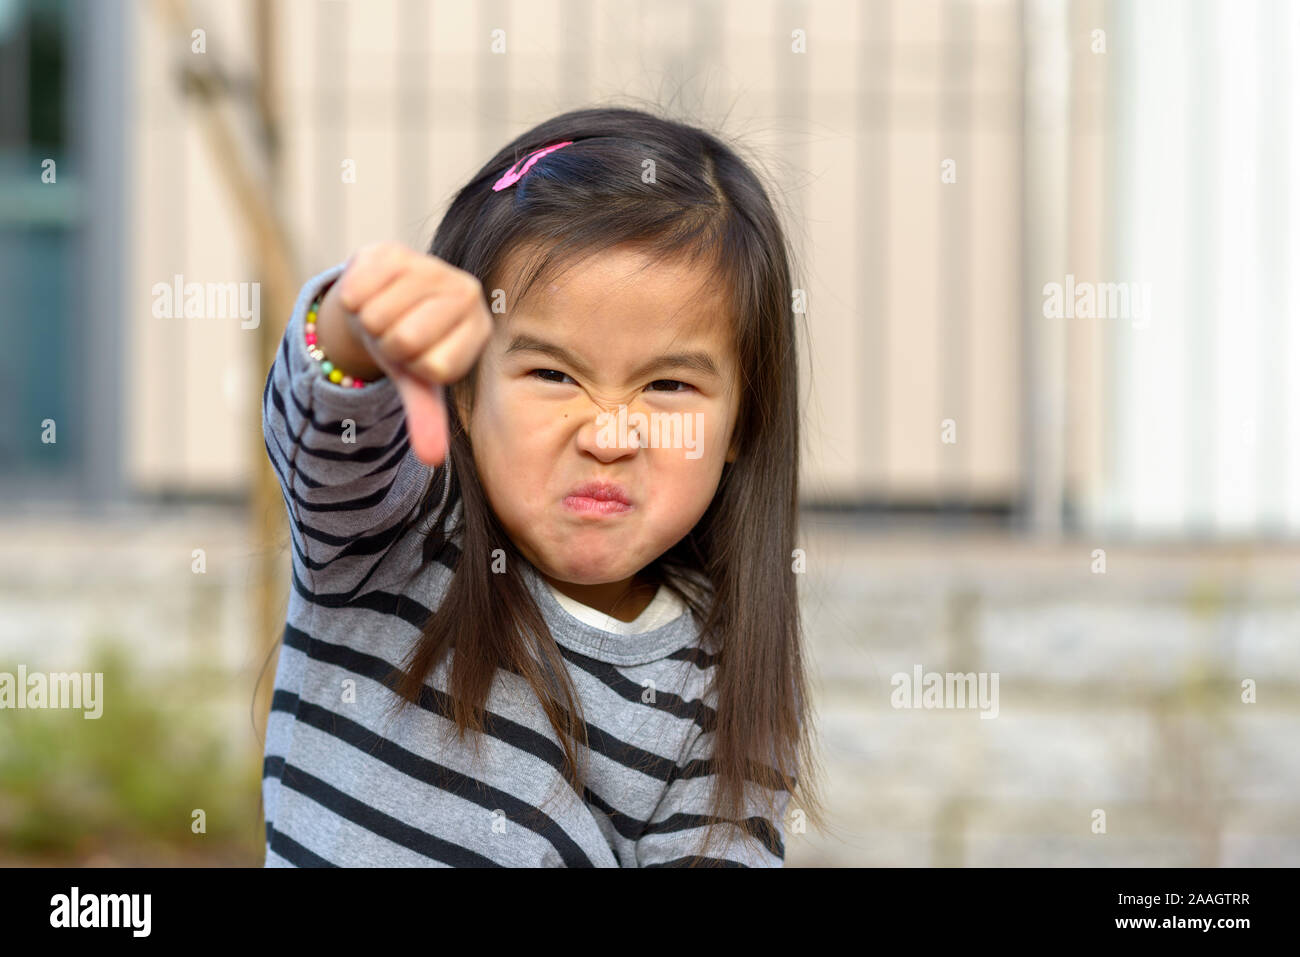 Angry frustrated little girl throwing a temper tantrum punching her fist at the camera with a furious vengeful expression outdoors Stock Photo